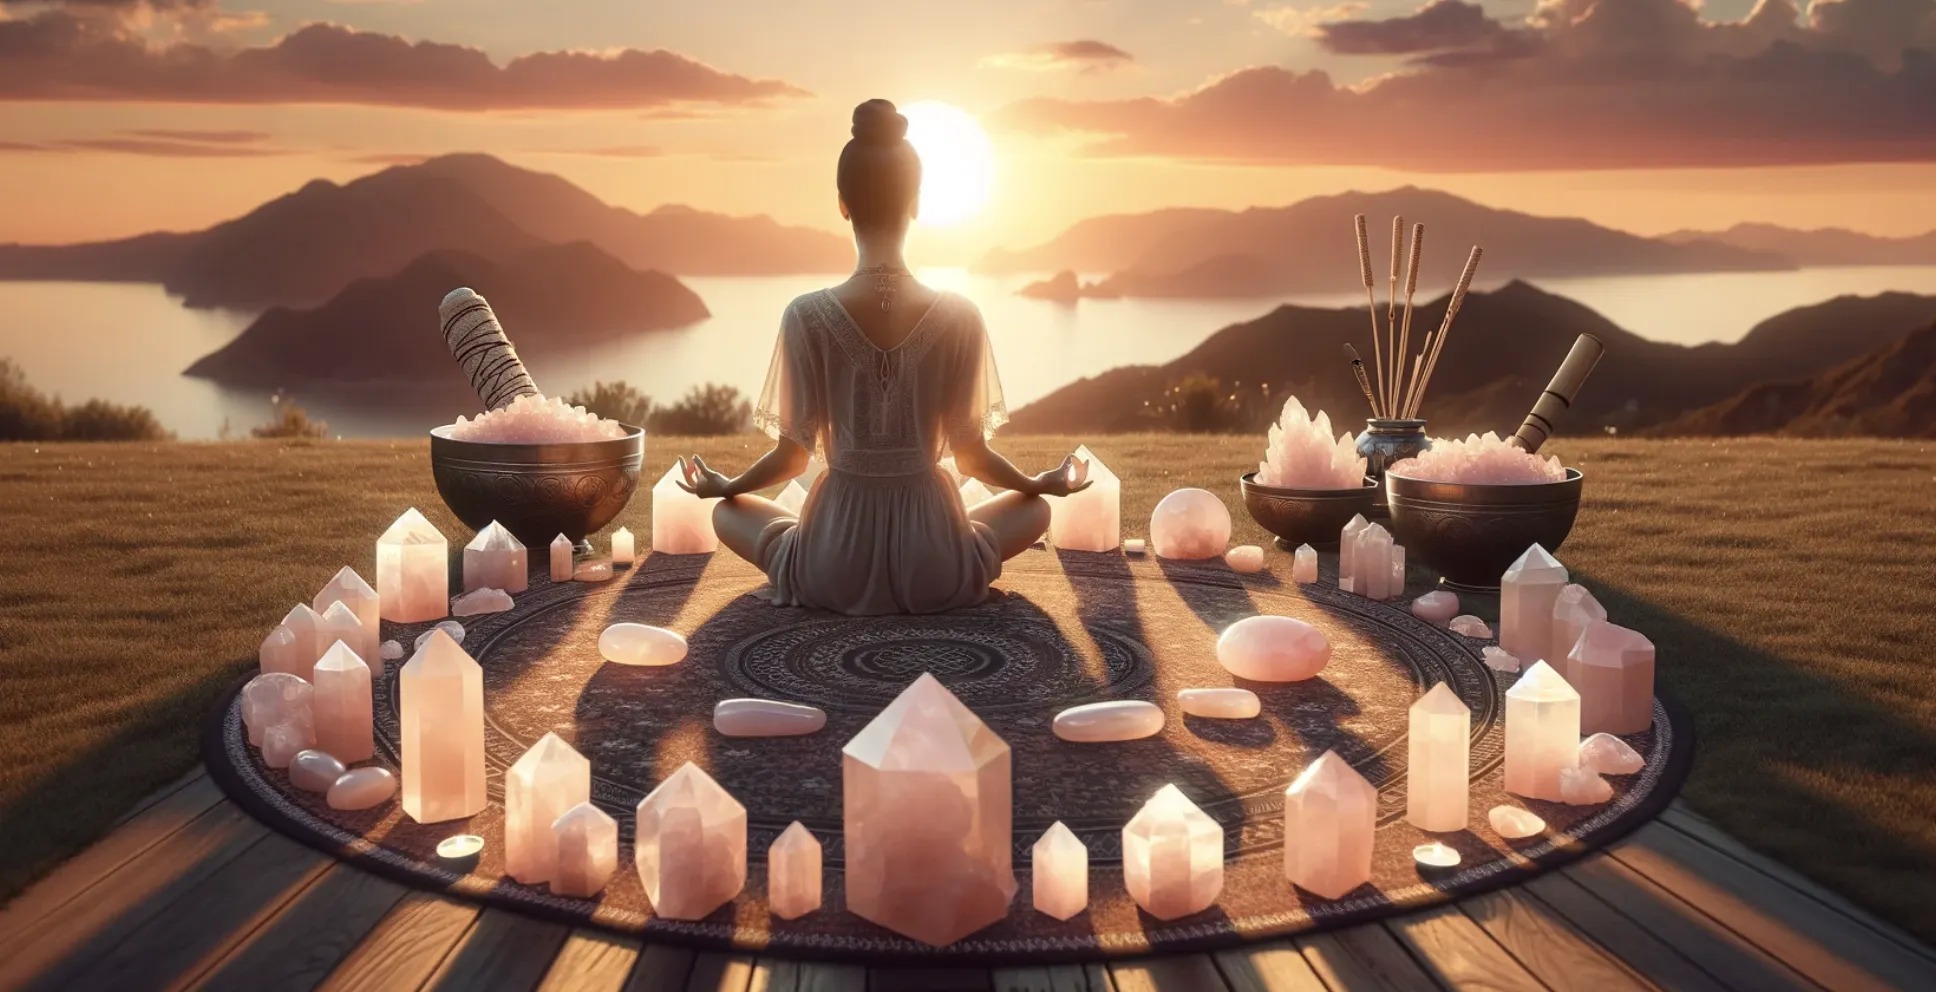 rose quartz crystals being used whilst a woman meditates